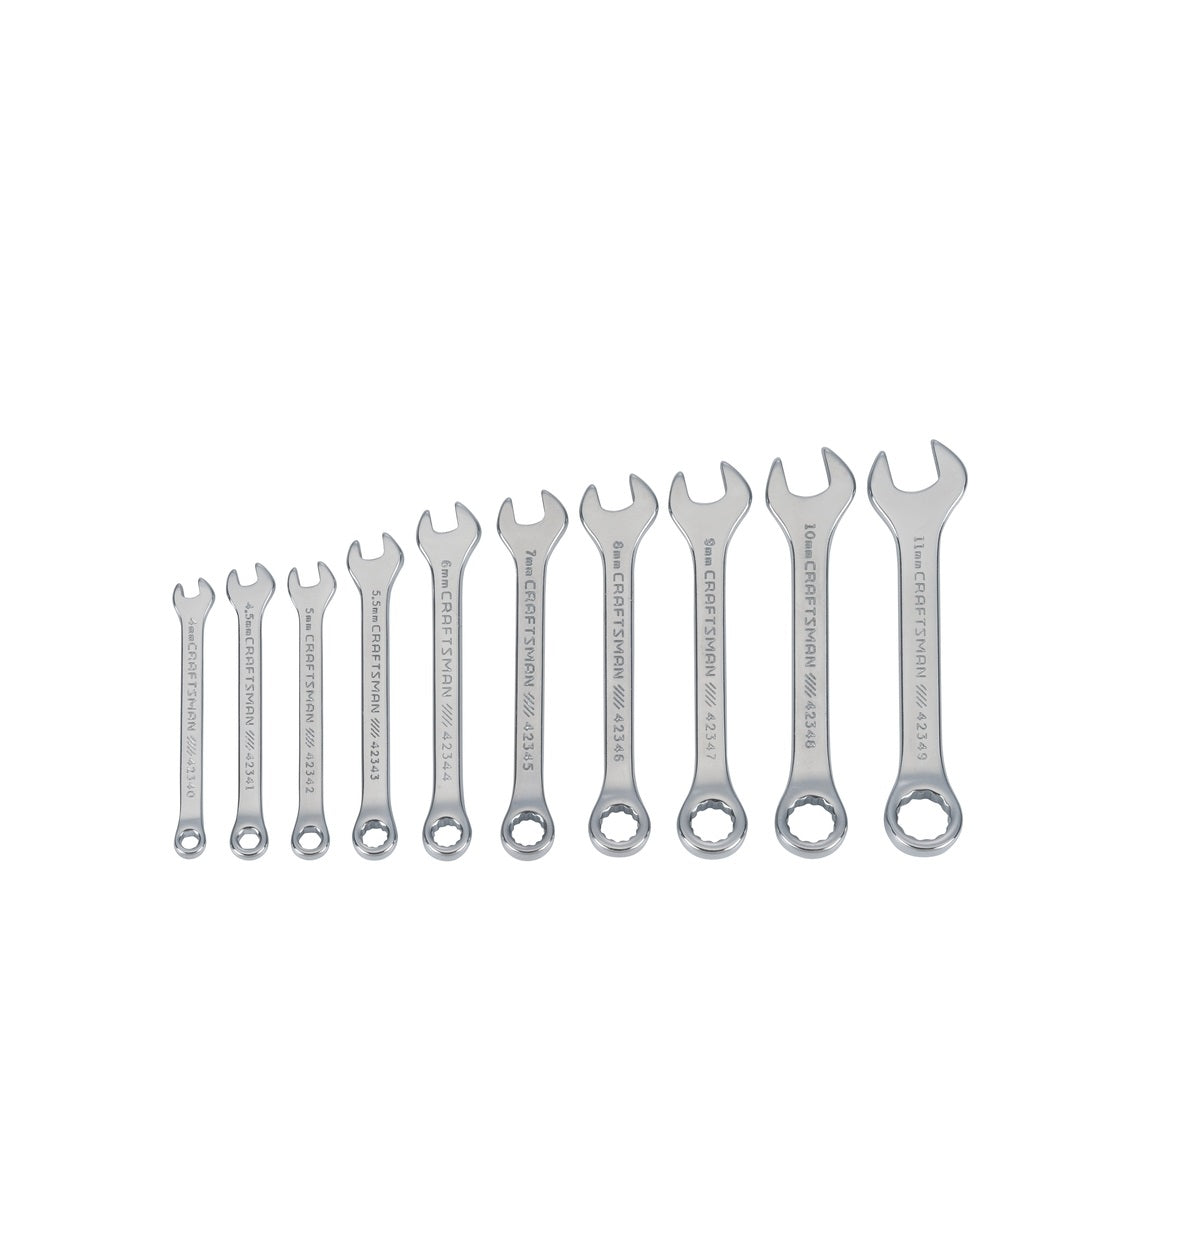 Craftsman CMMT42339 Metric Ignition Wrench Set, 10 Piece